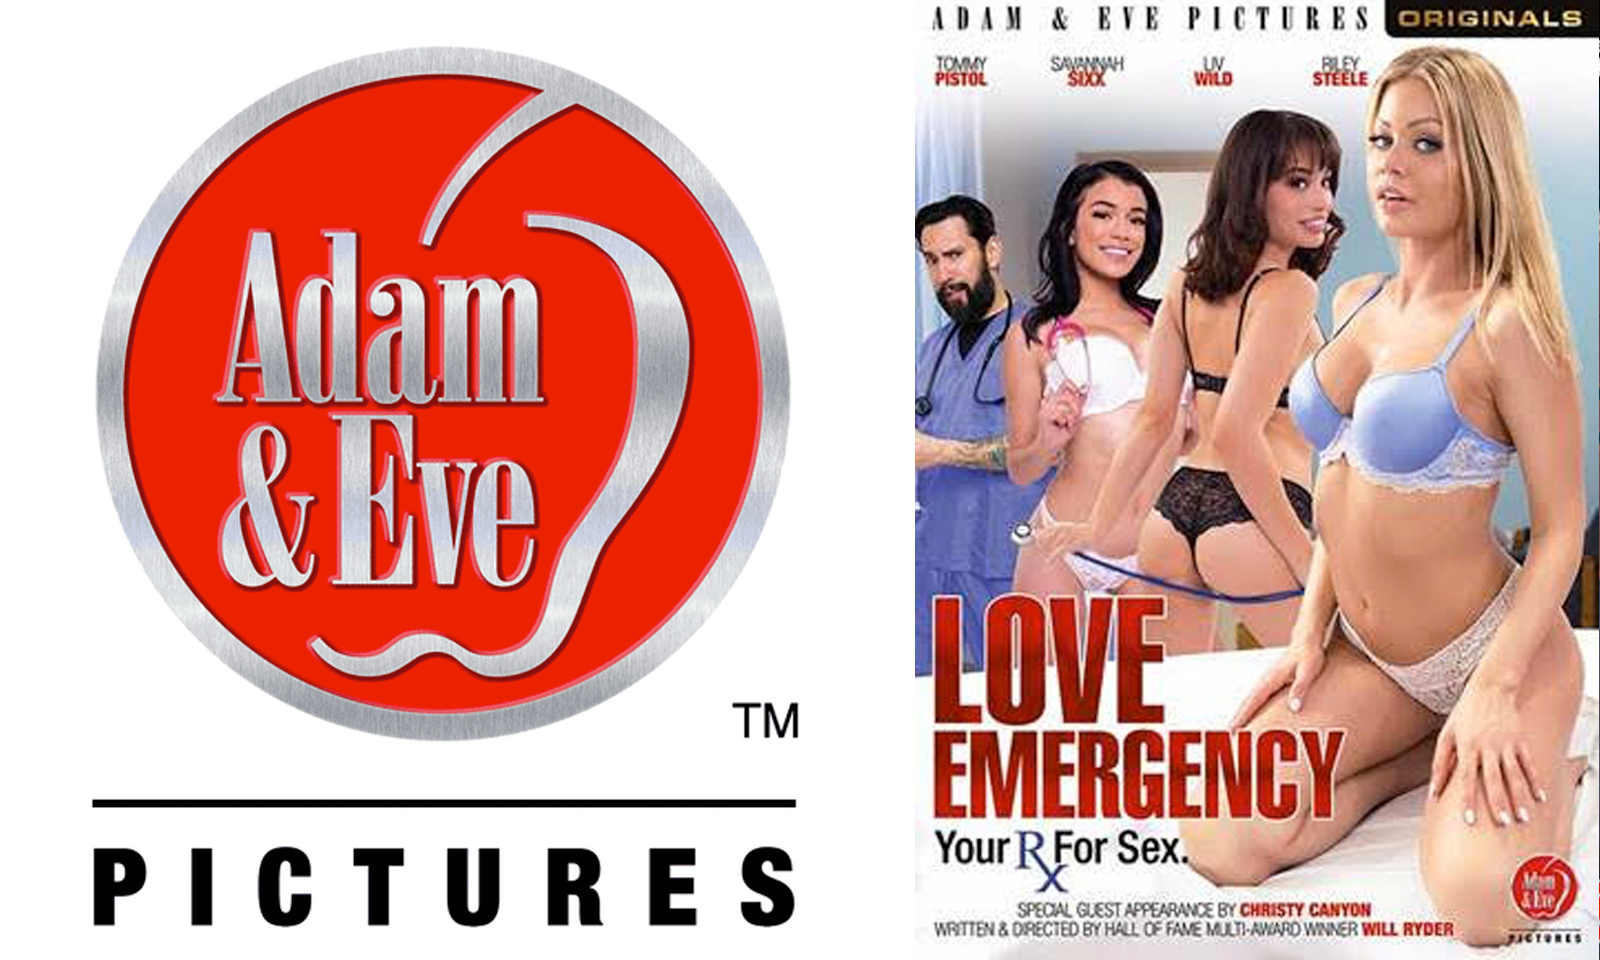 Adam & Eve Debuts Clothed, NSFW Covers for ‘Love Emergency’